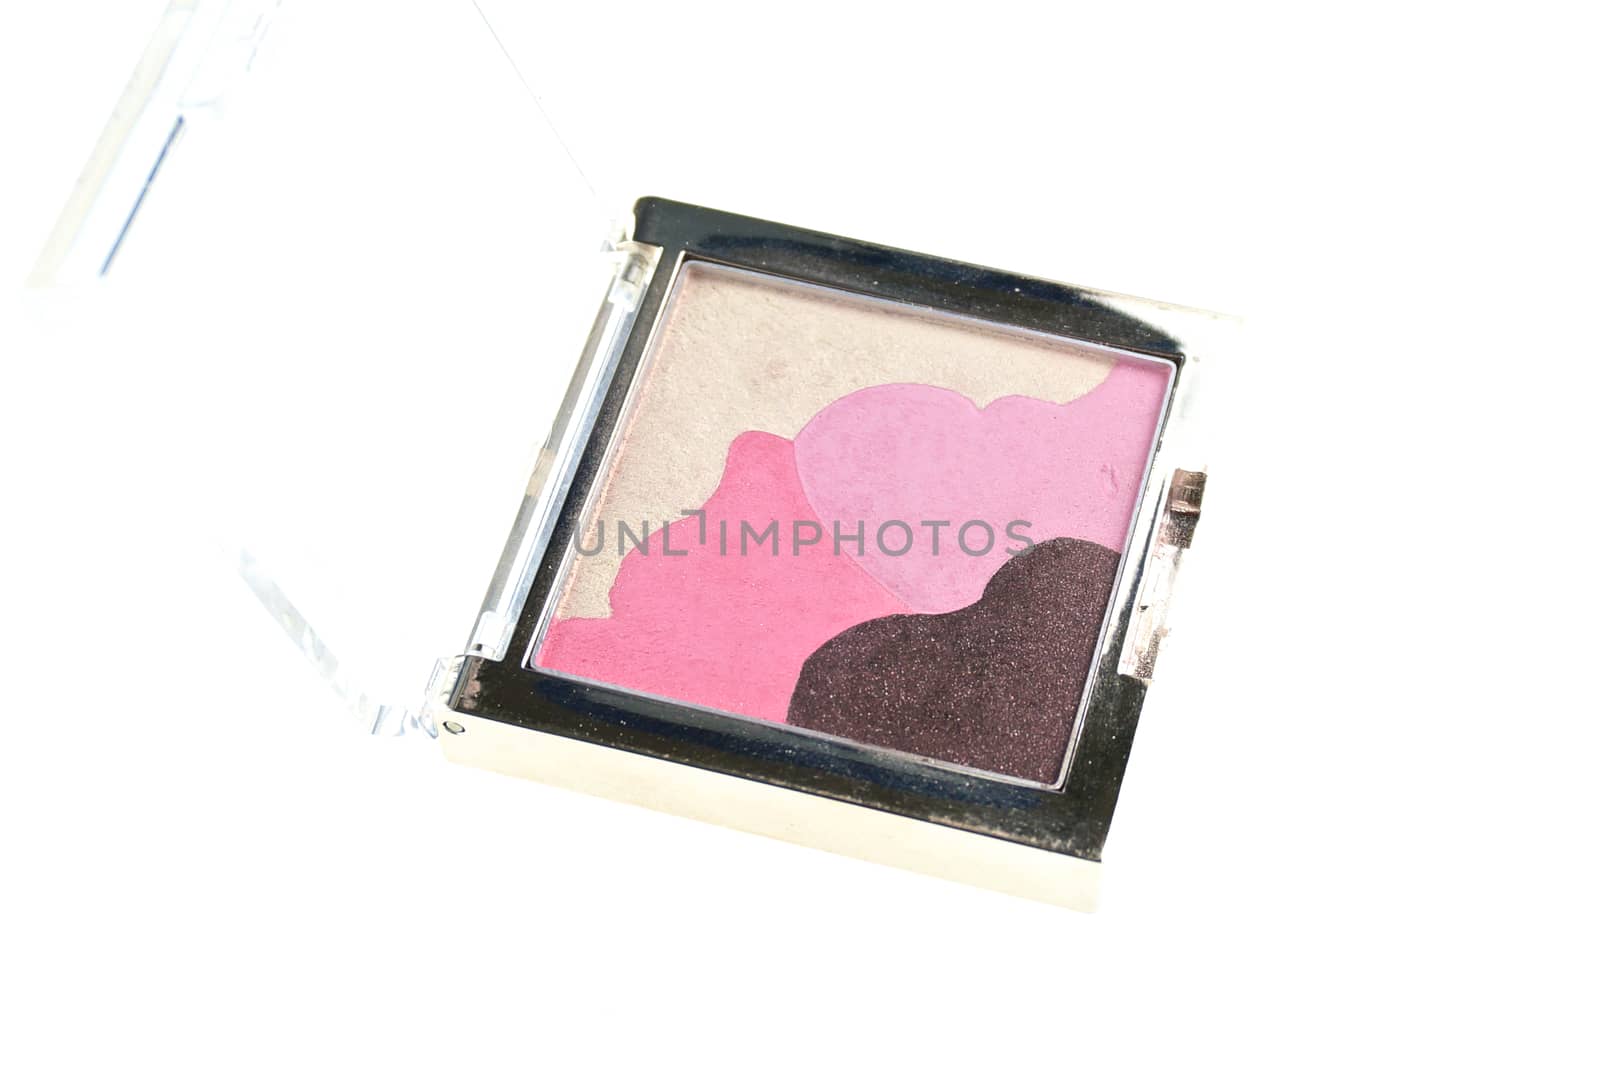 Colorful powder for makeup in box isolated with white background.